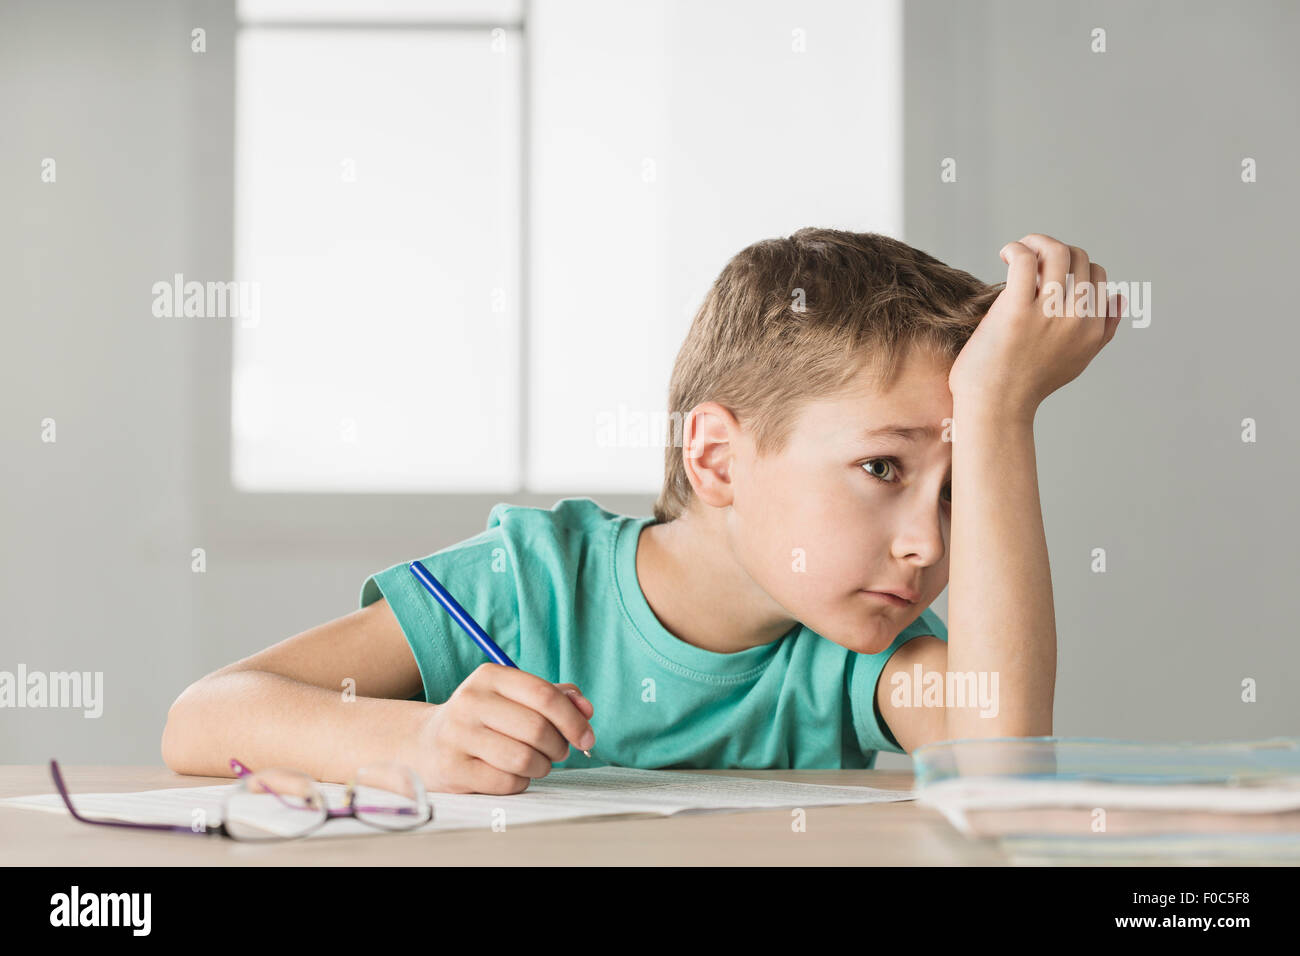 Bored boy with hand on forehead doing homework at home Stock Photo